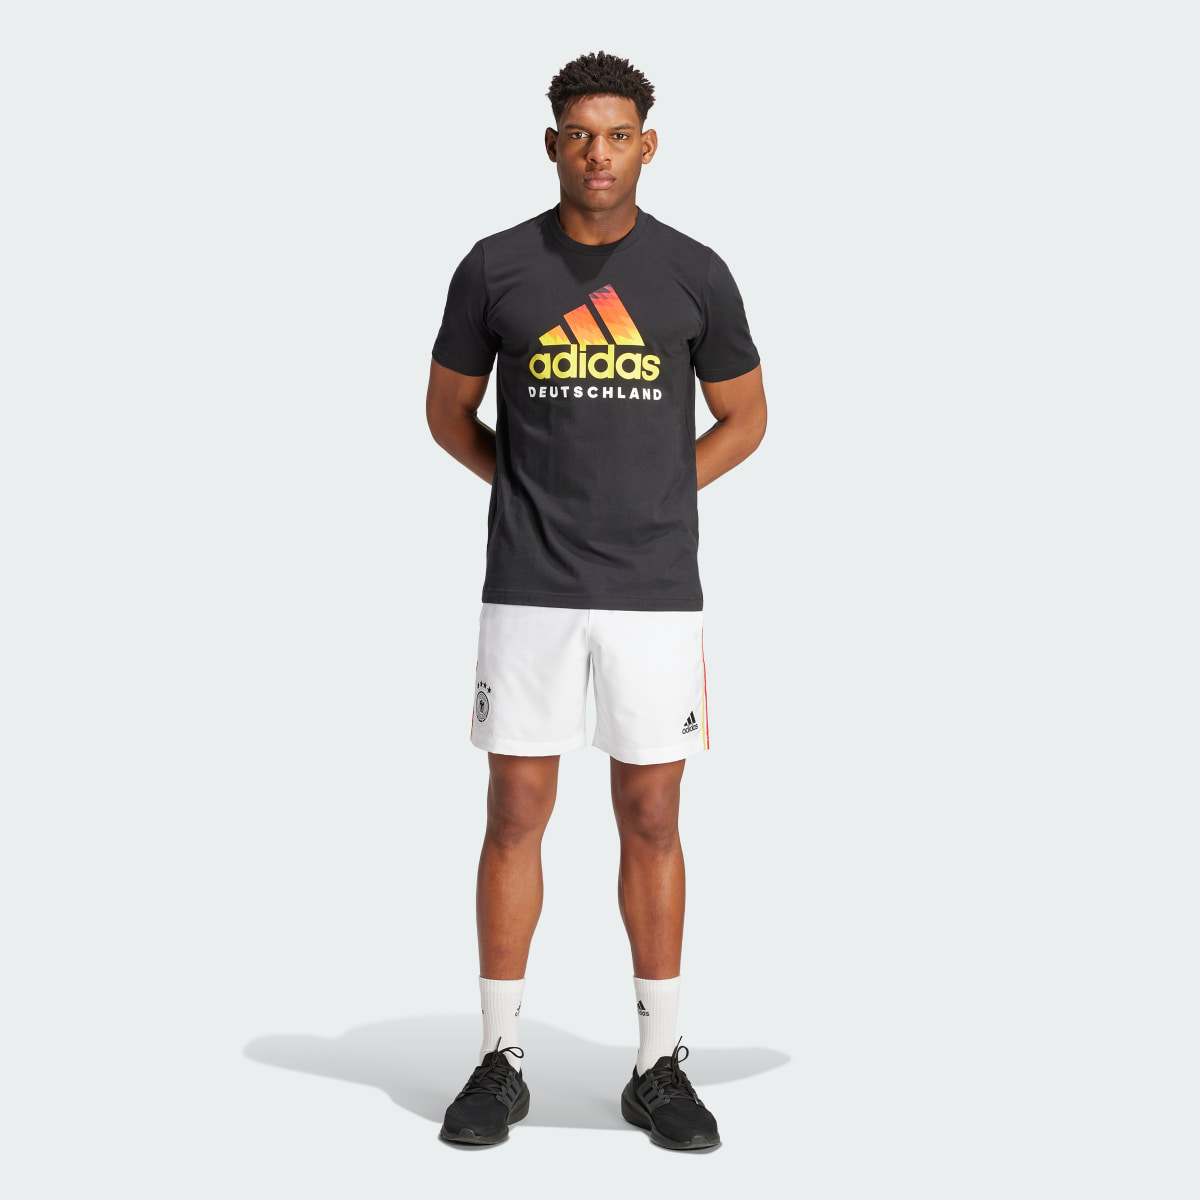 Adidas Germany DNA Graphic T-Shirt. 5